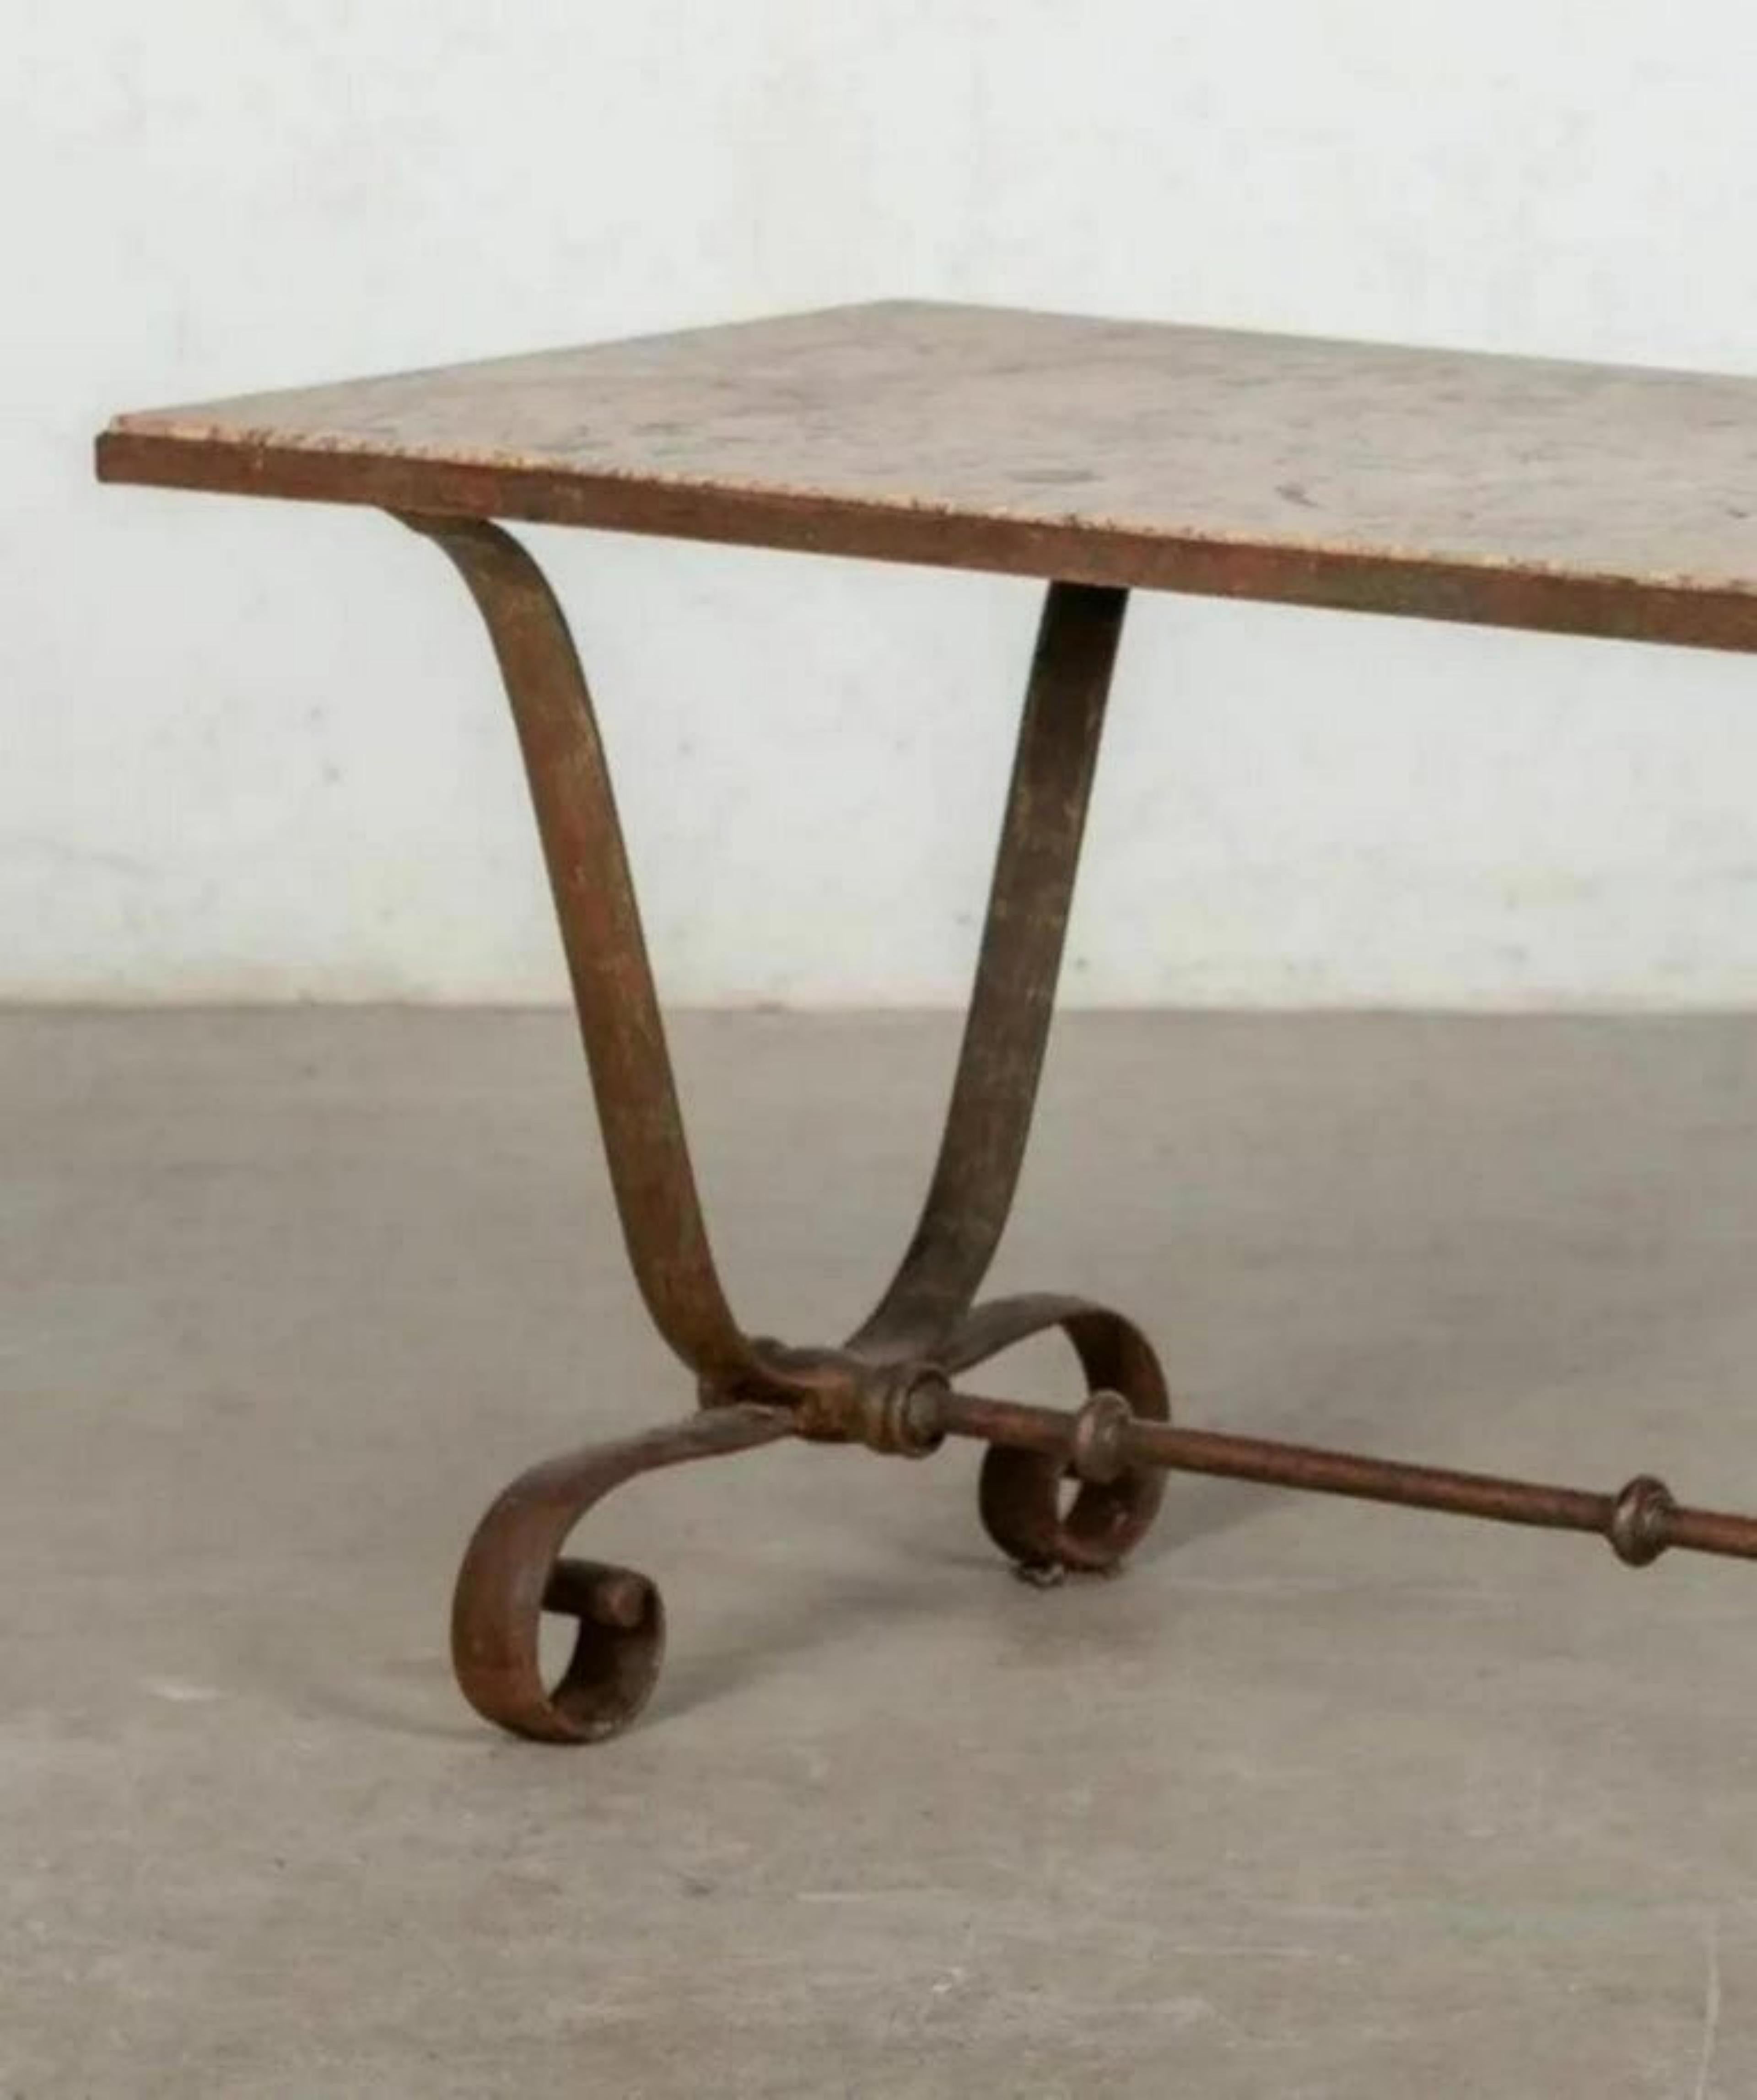 Hand-Crafted Italian Iron and Marble Table, 20th Century For Sale